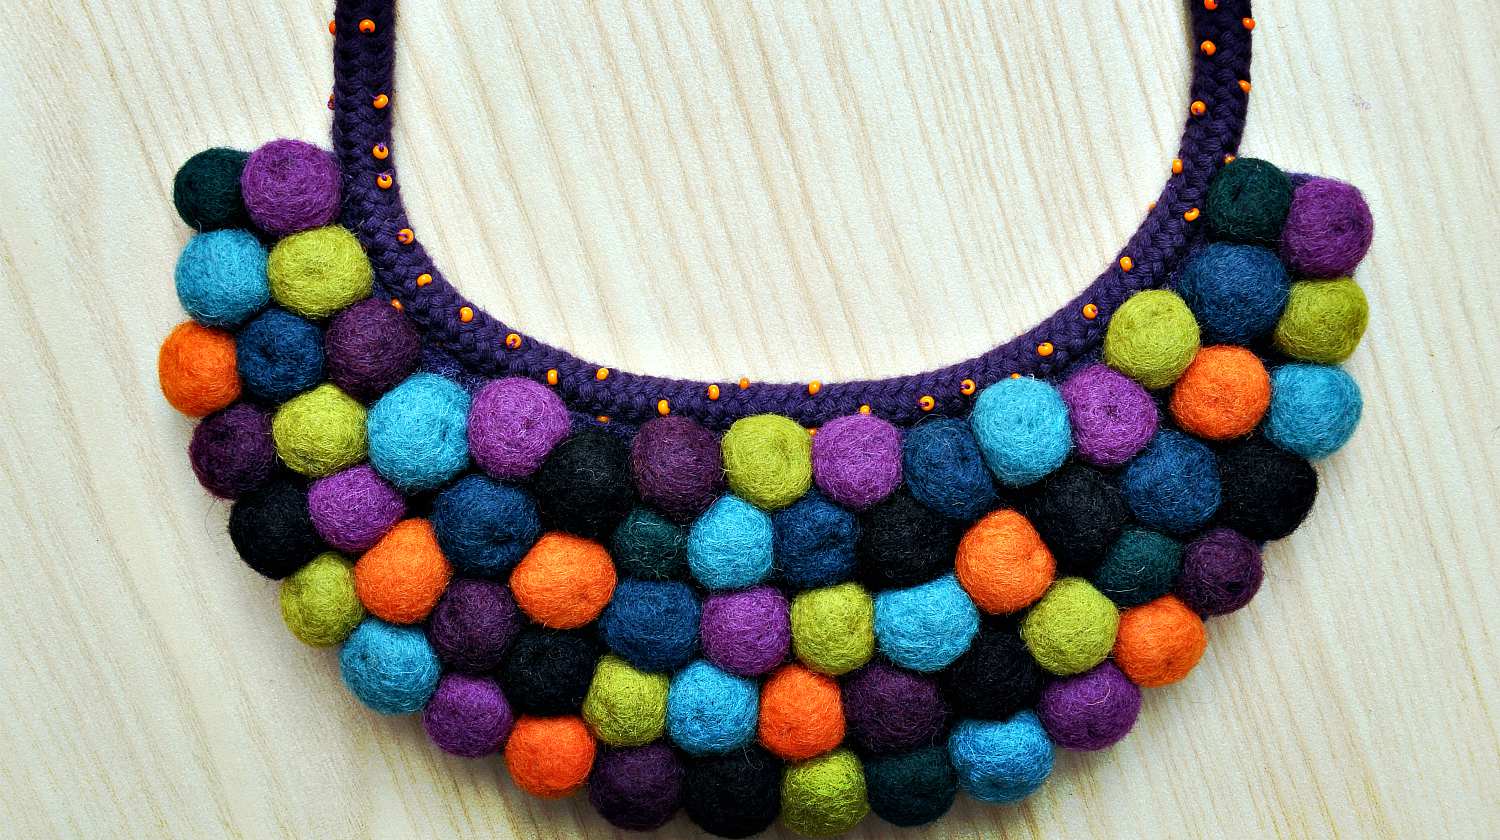 Feature | Colorful felt balls necklace | DIY Felt Balls Projects And Crafting Ideas